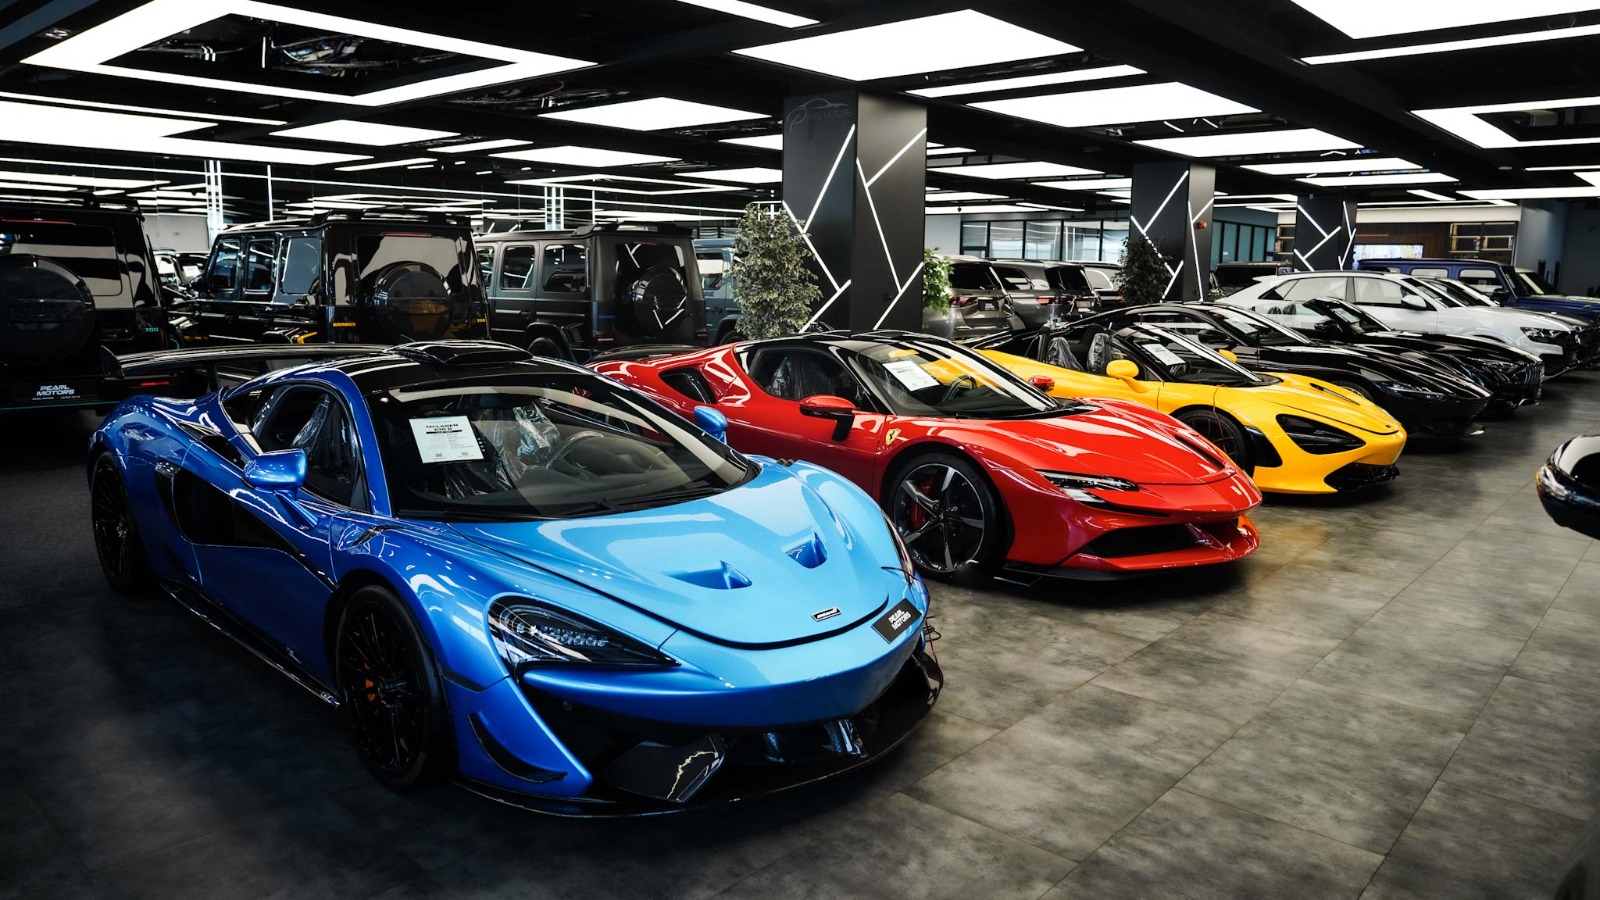 Dive into the World of Automotive Madness at Pearl Motors in the heart of dubai